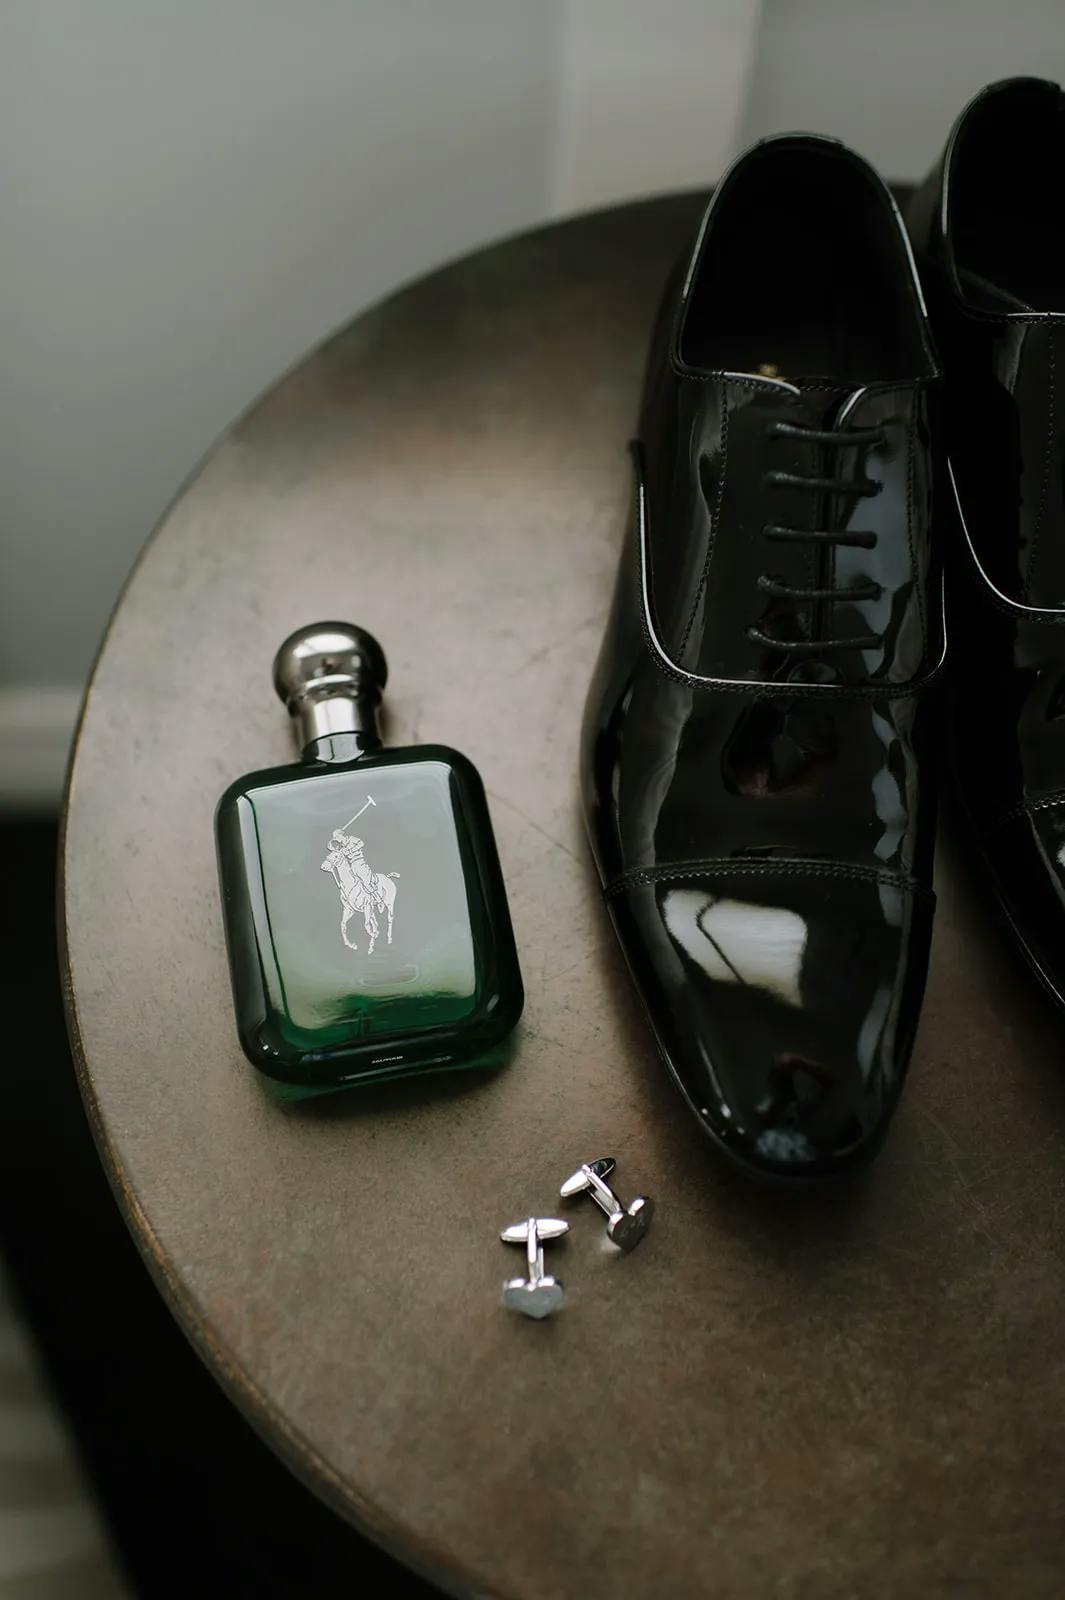 A pair of polished black dress shoes, a green glass bottle of Ralph Lauren cologne with a silver cap, and a set of silver cufflinks are neatly arranged on a round wooden table. The cufflinks feature a minimalist design with straight edges.